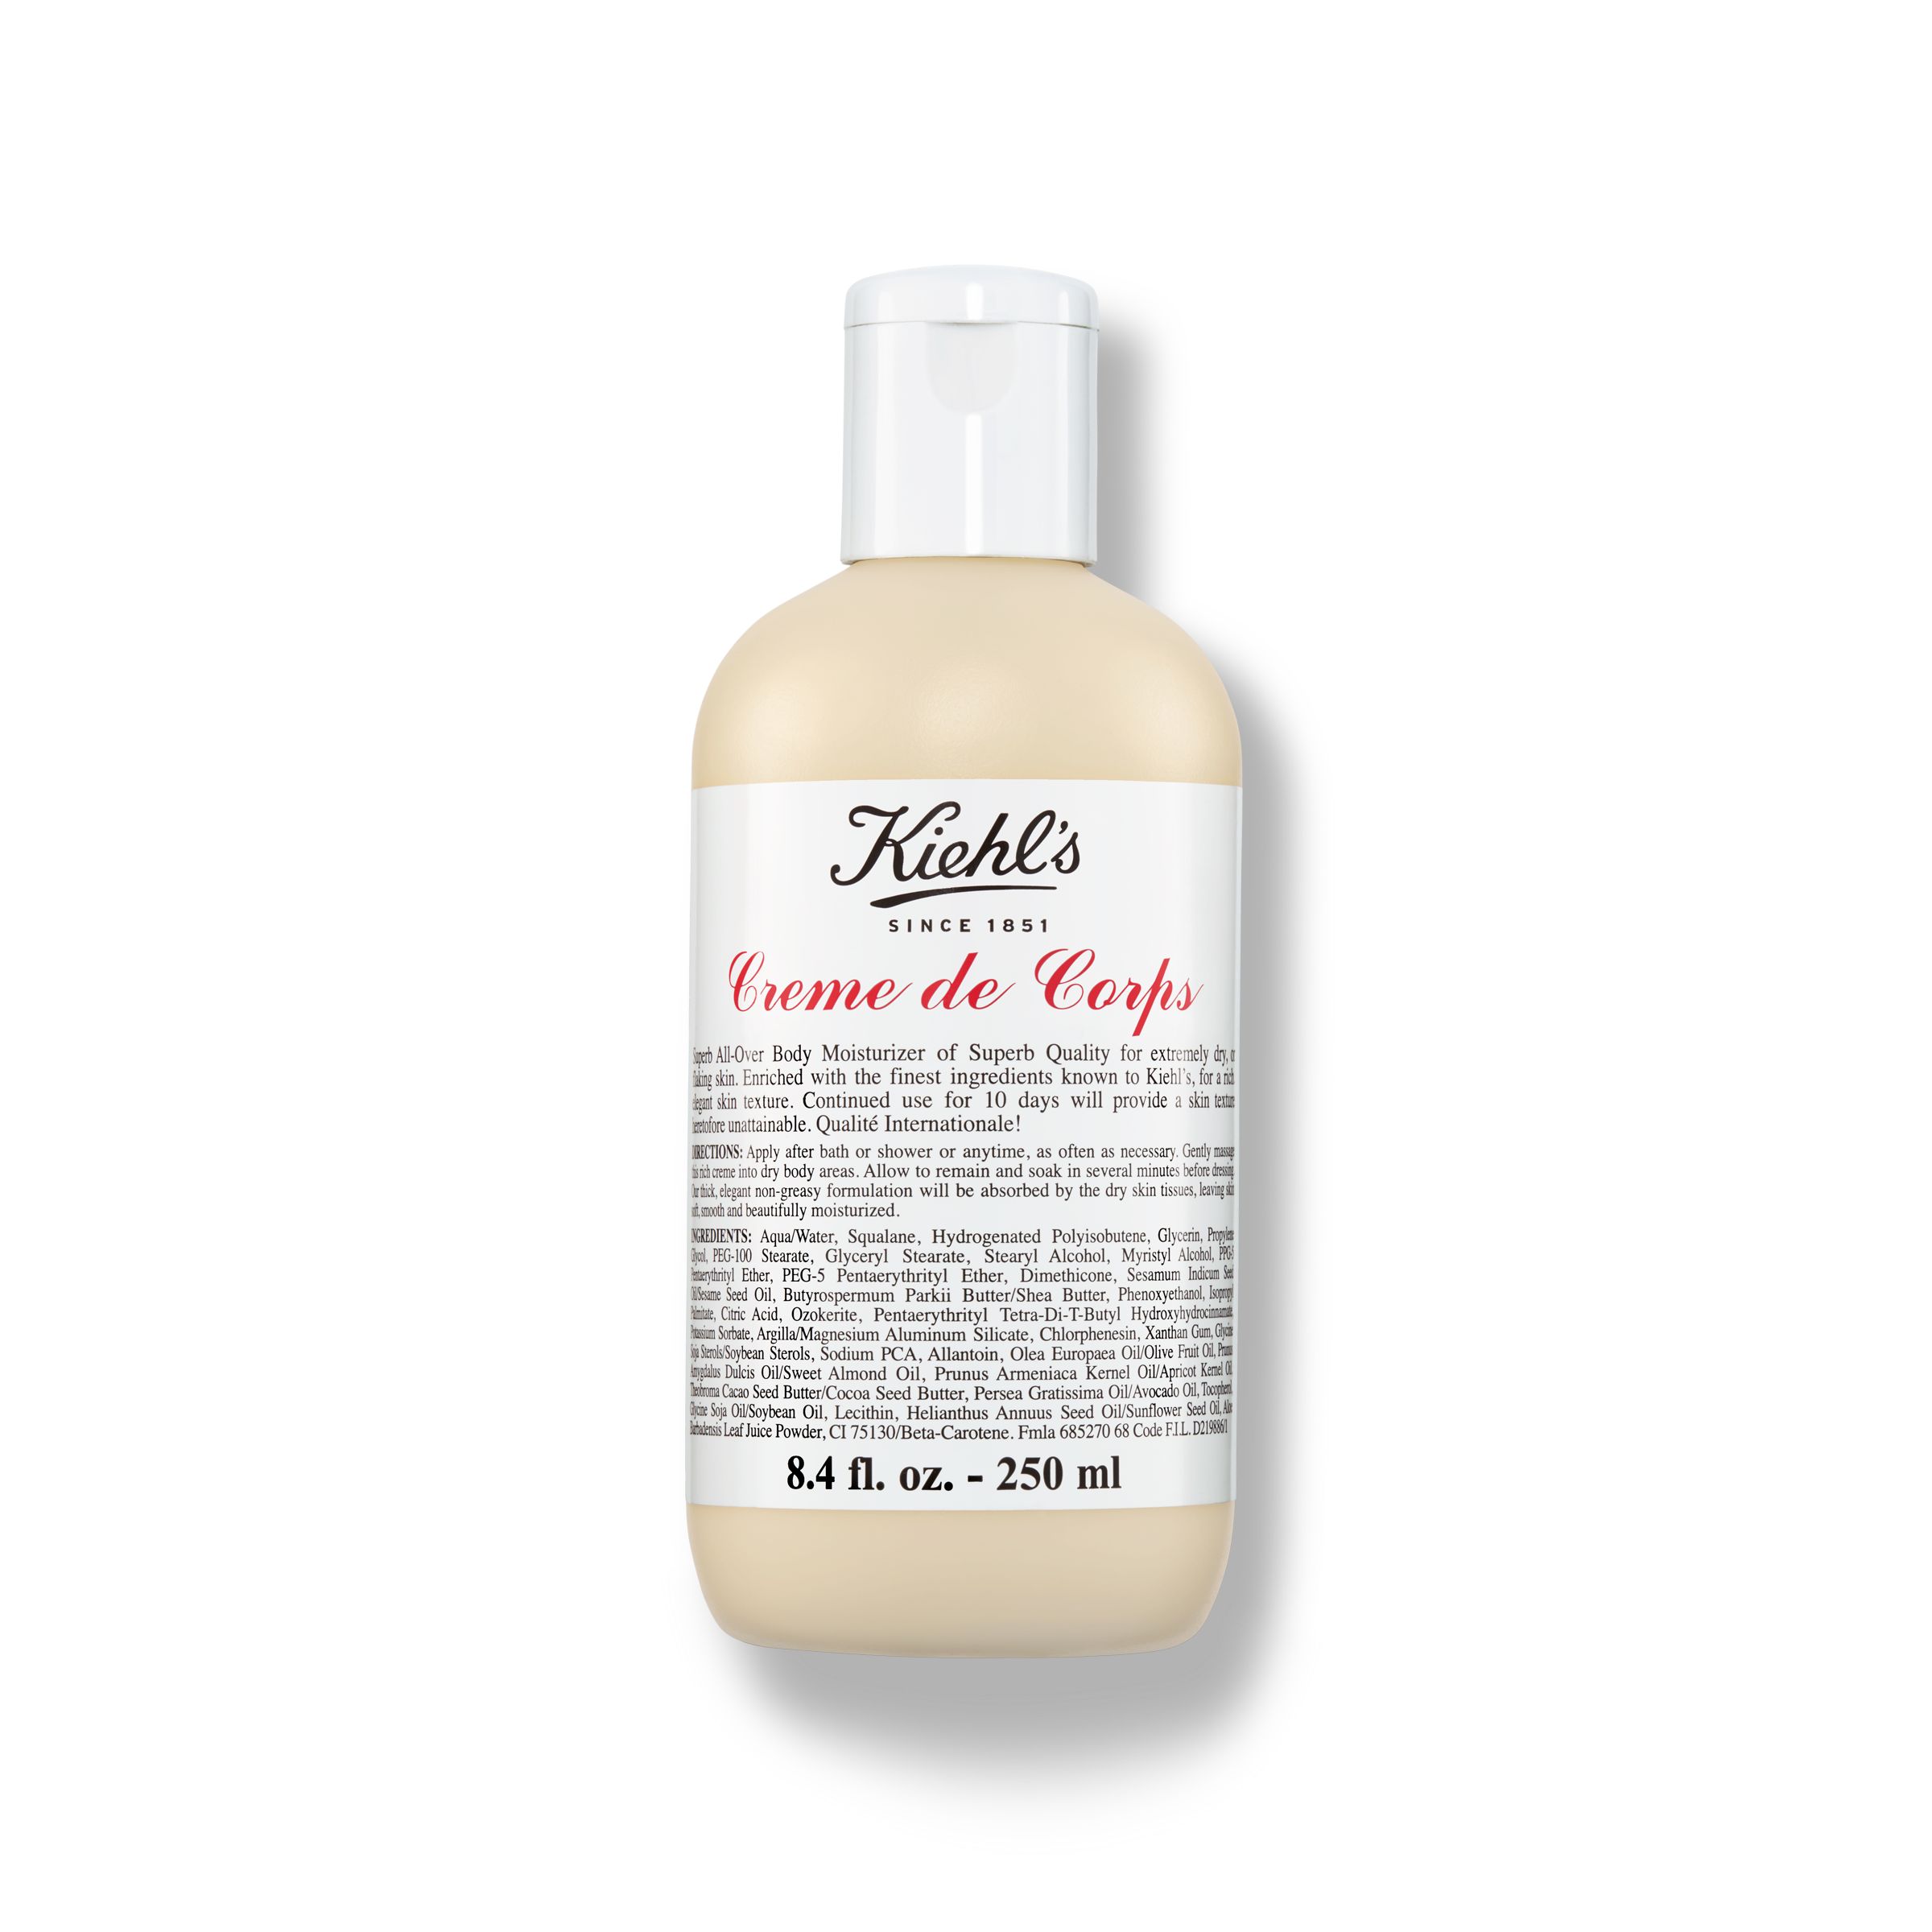 Creme de Corps Body Lotion with Cocoa Butter | Kiehls (US)